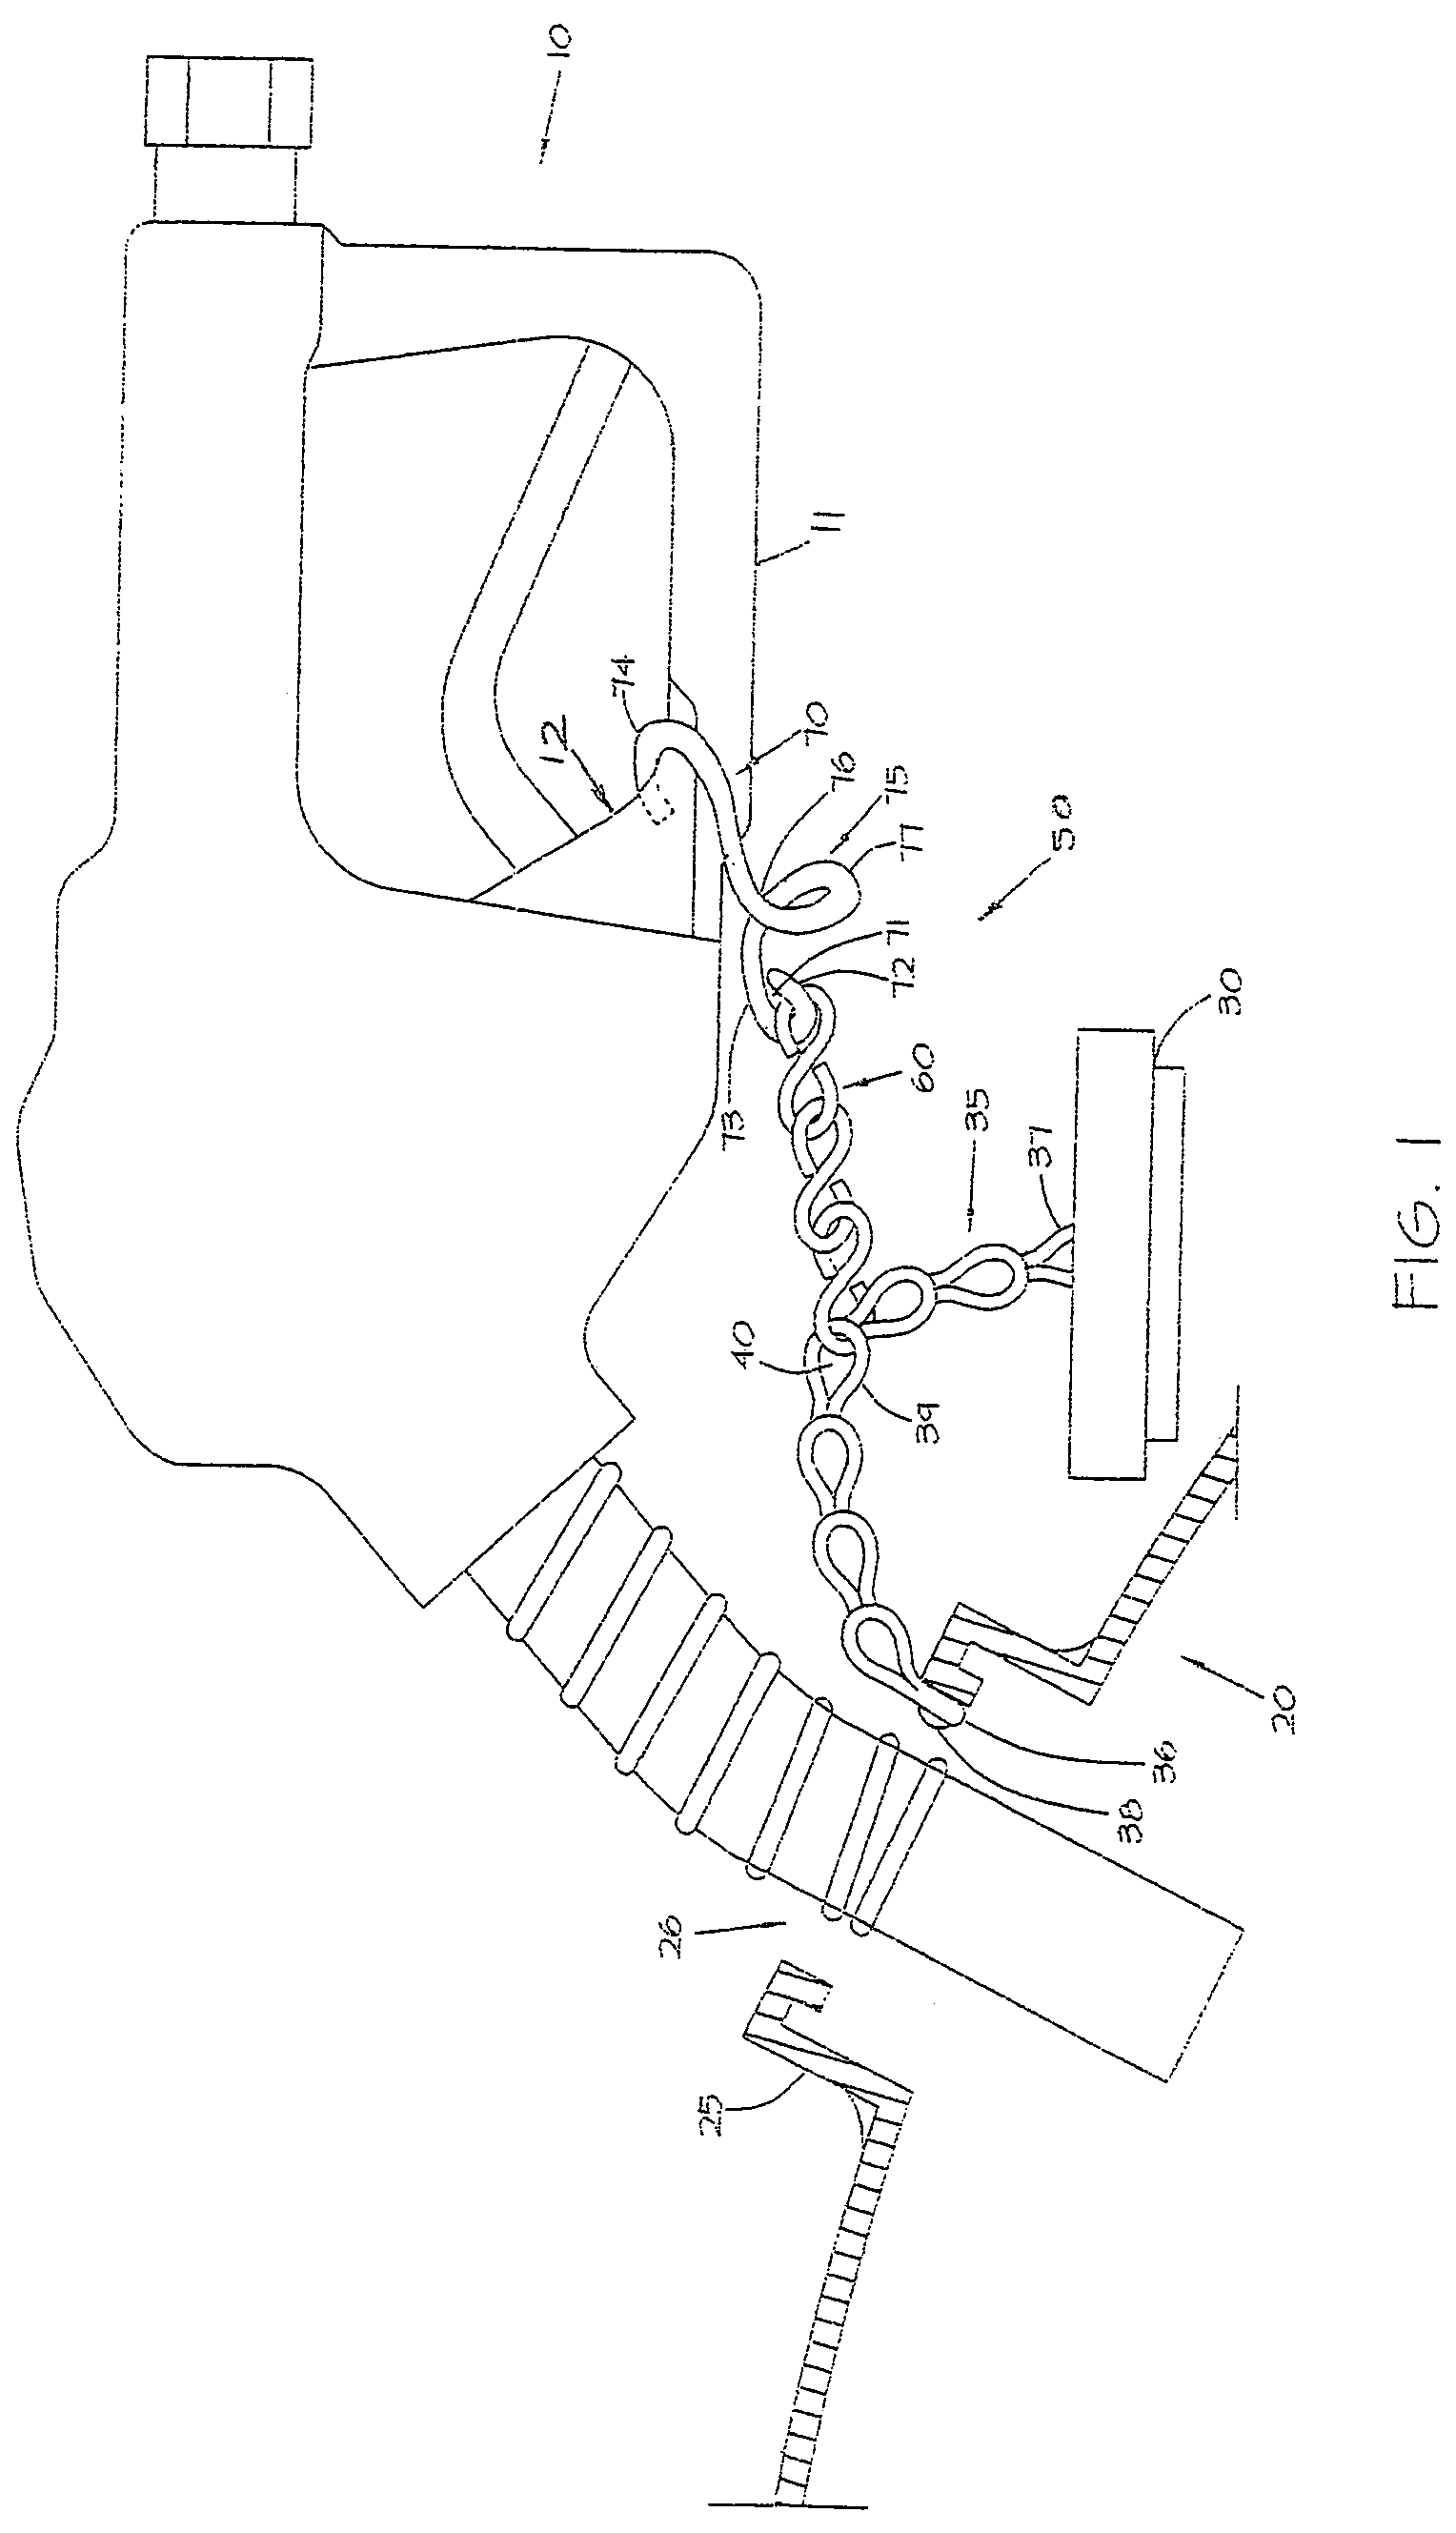 Device for securing a dispensing nozzle to a fill tank